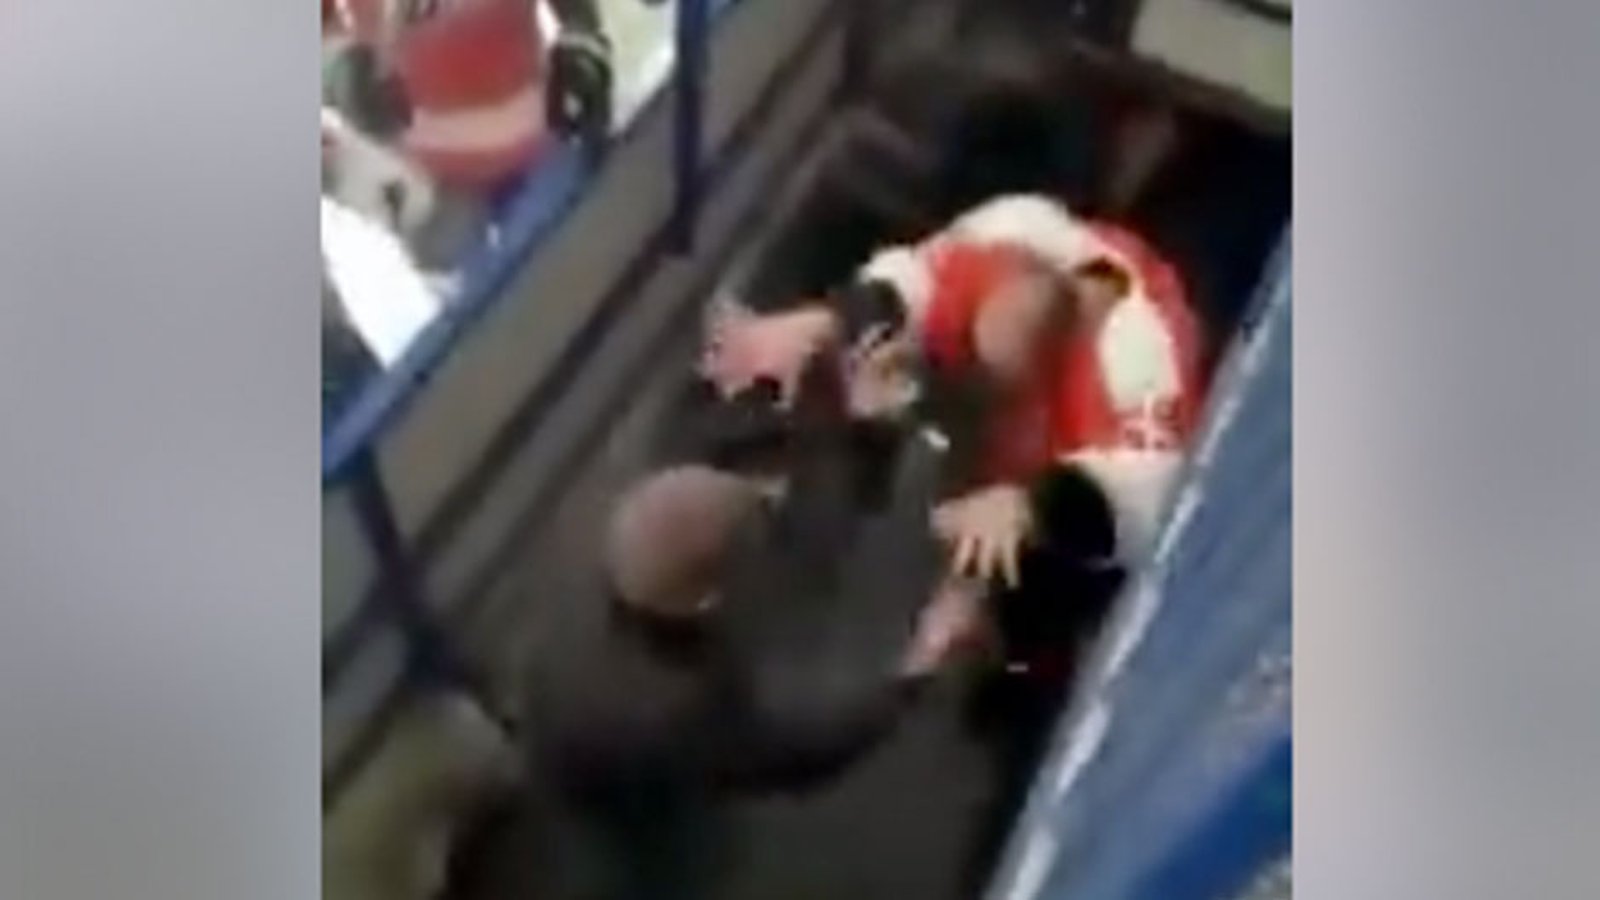 Fans attack players on the bench in crazy Russian hockey brawl